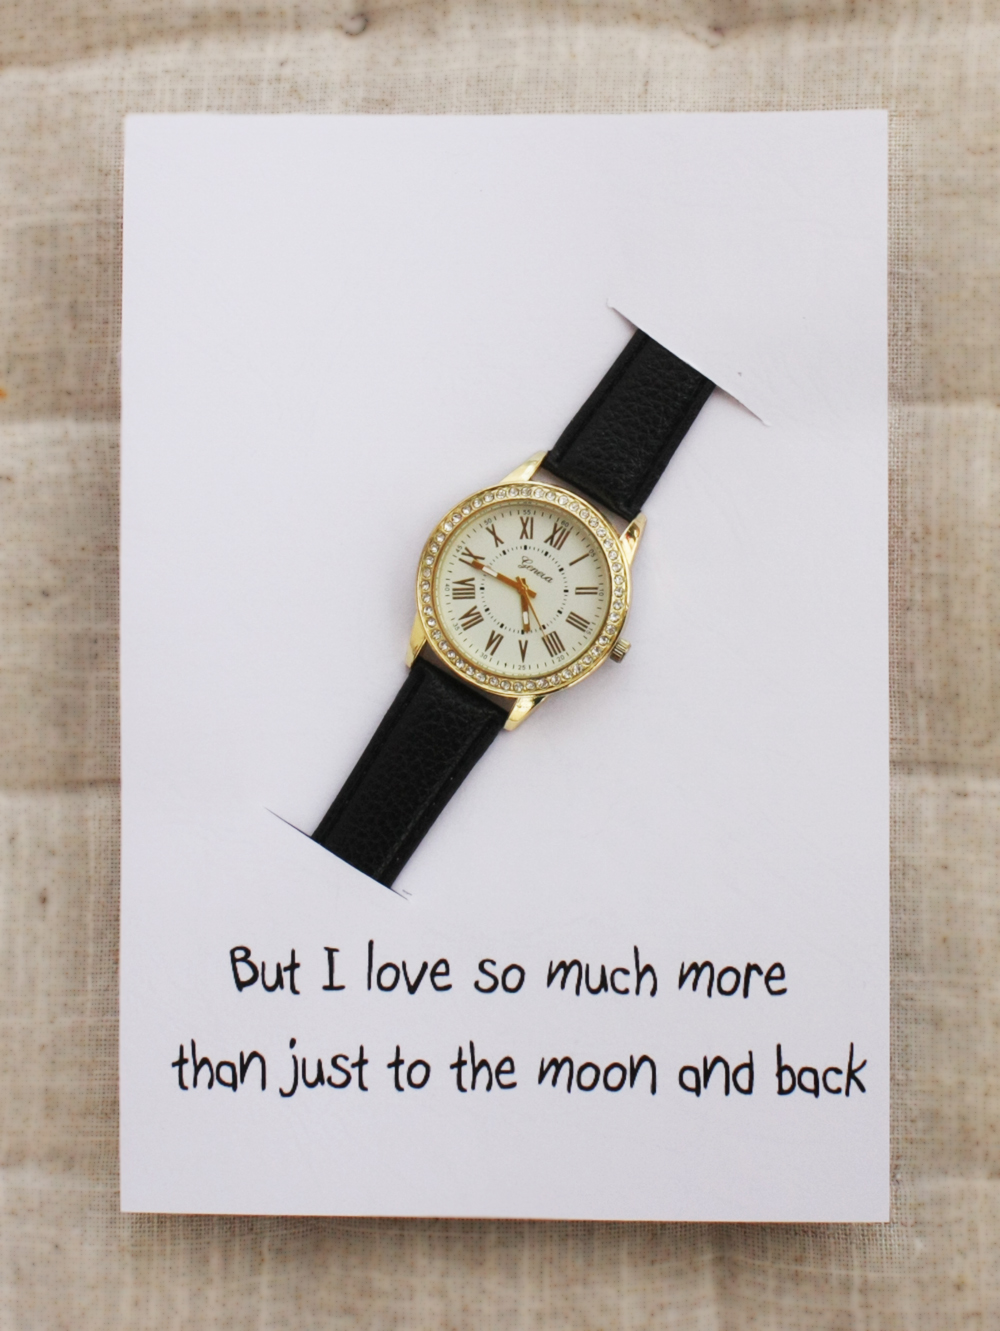 I Love You Much More Than To The Moon And Back Card Black Band Rhinestones Fashion Case Girl Watch